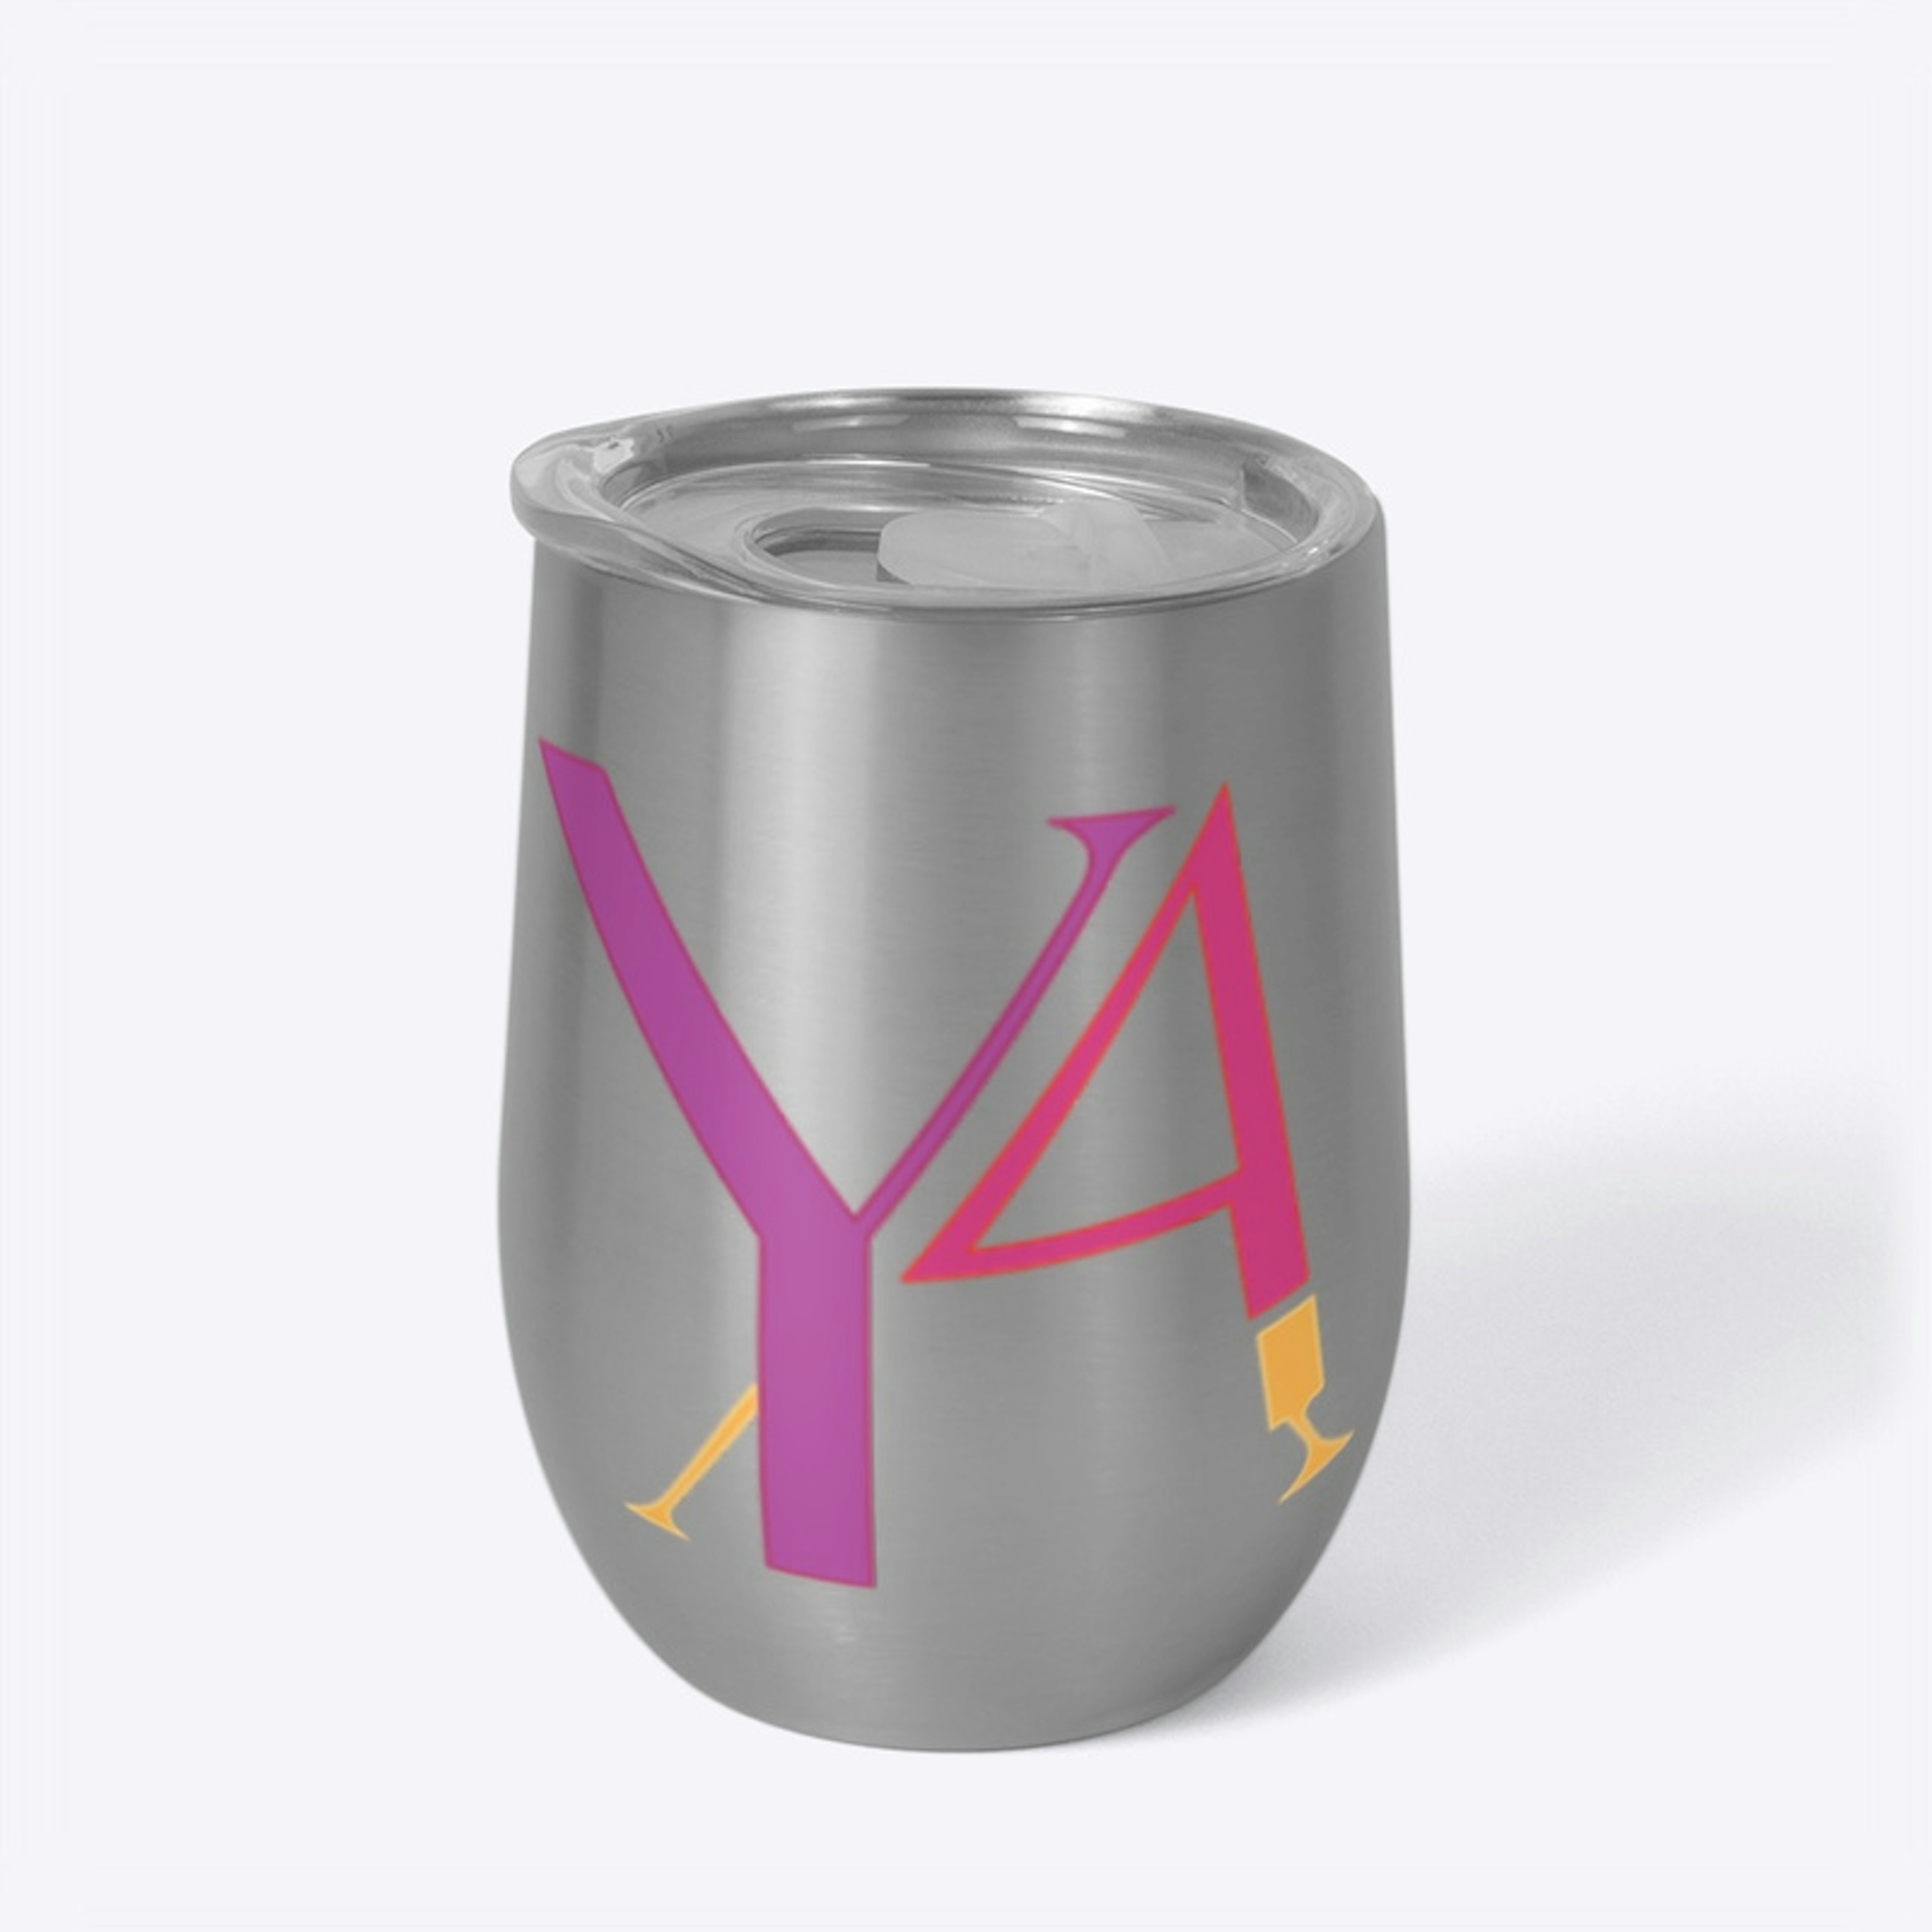 Y4A 11oz Stainless Steel Wine Tumbler